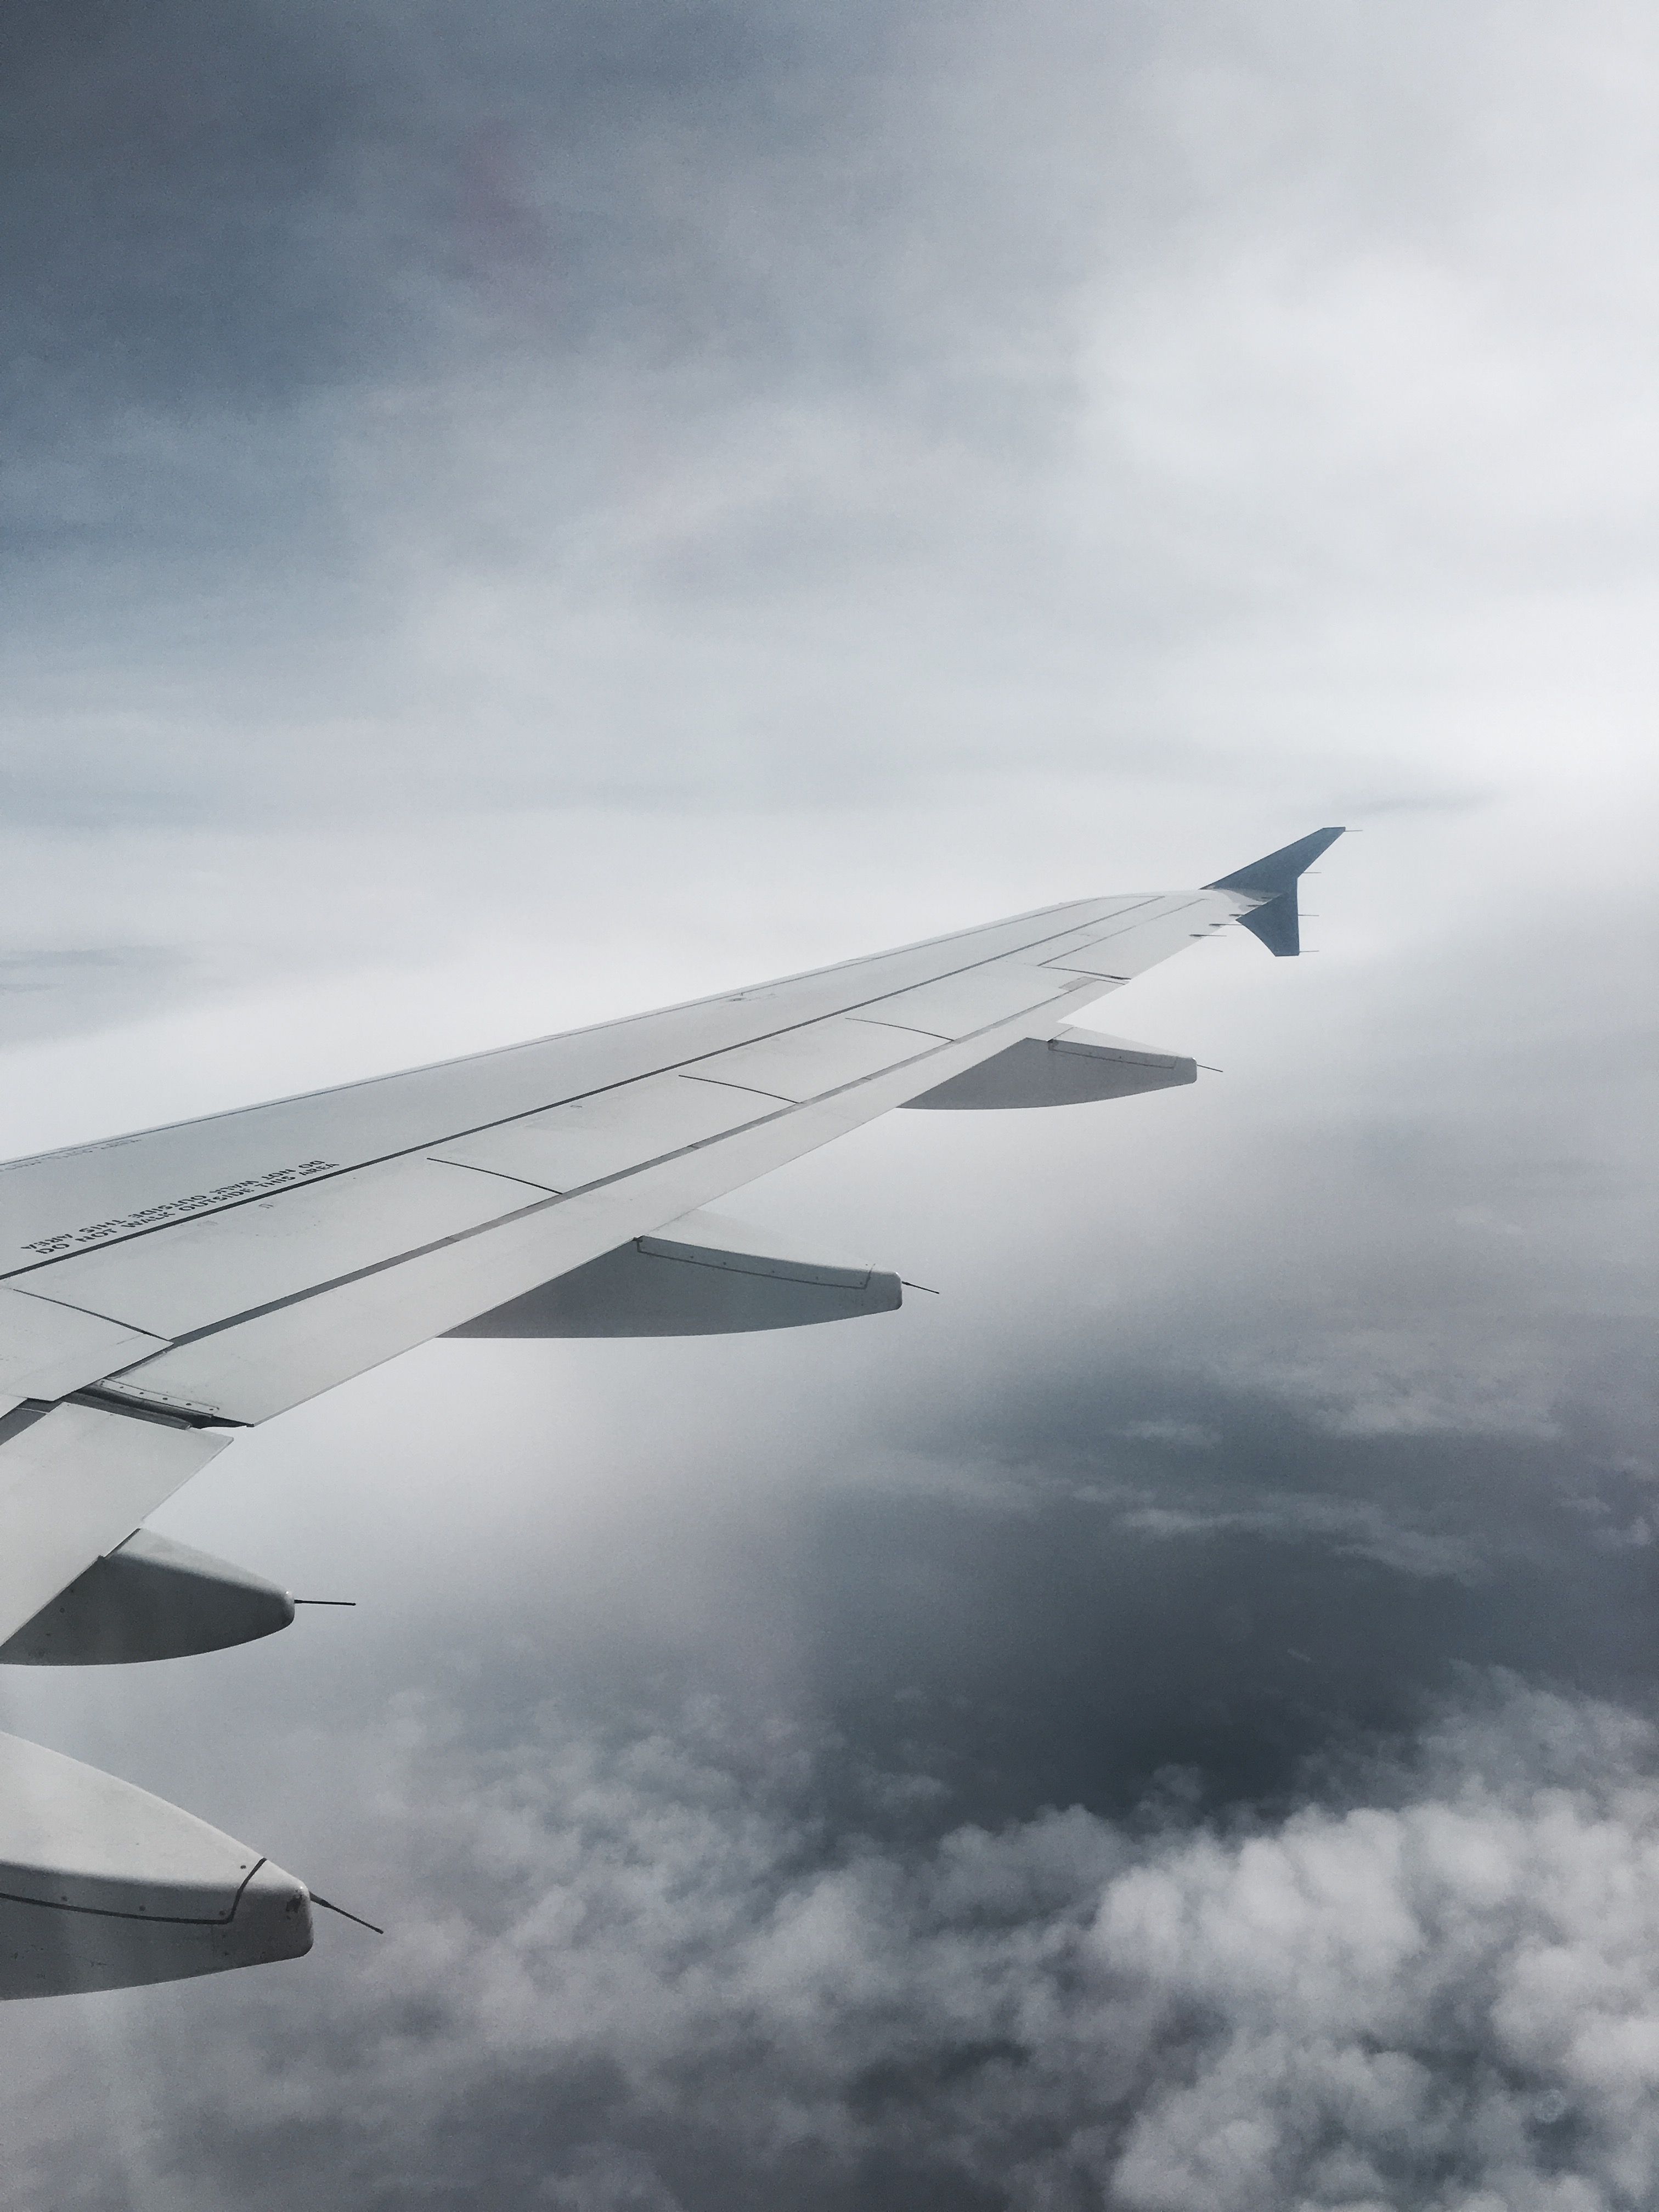 Airplane window, cloudy, sky, plane wing, aesthetic, photography ...